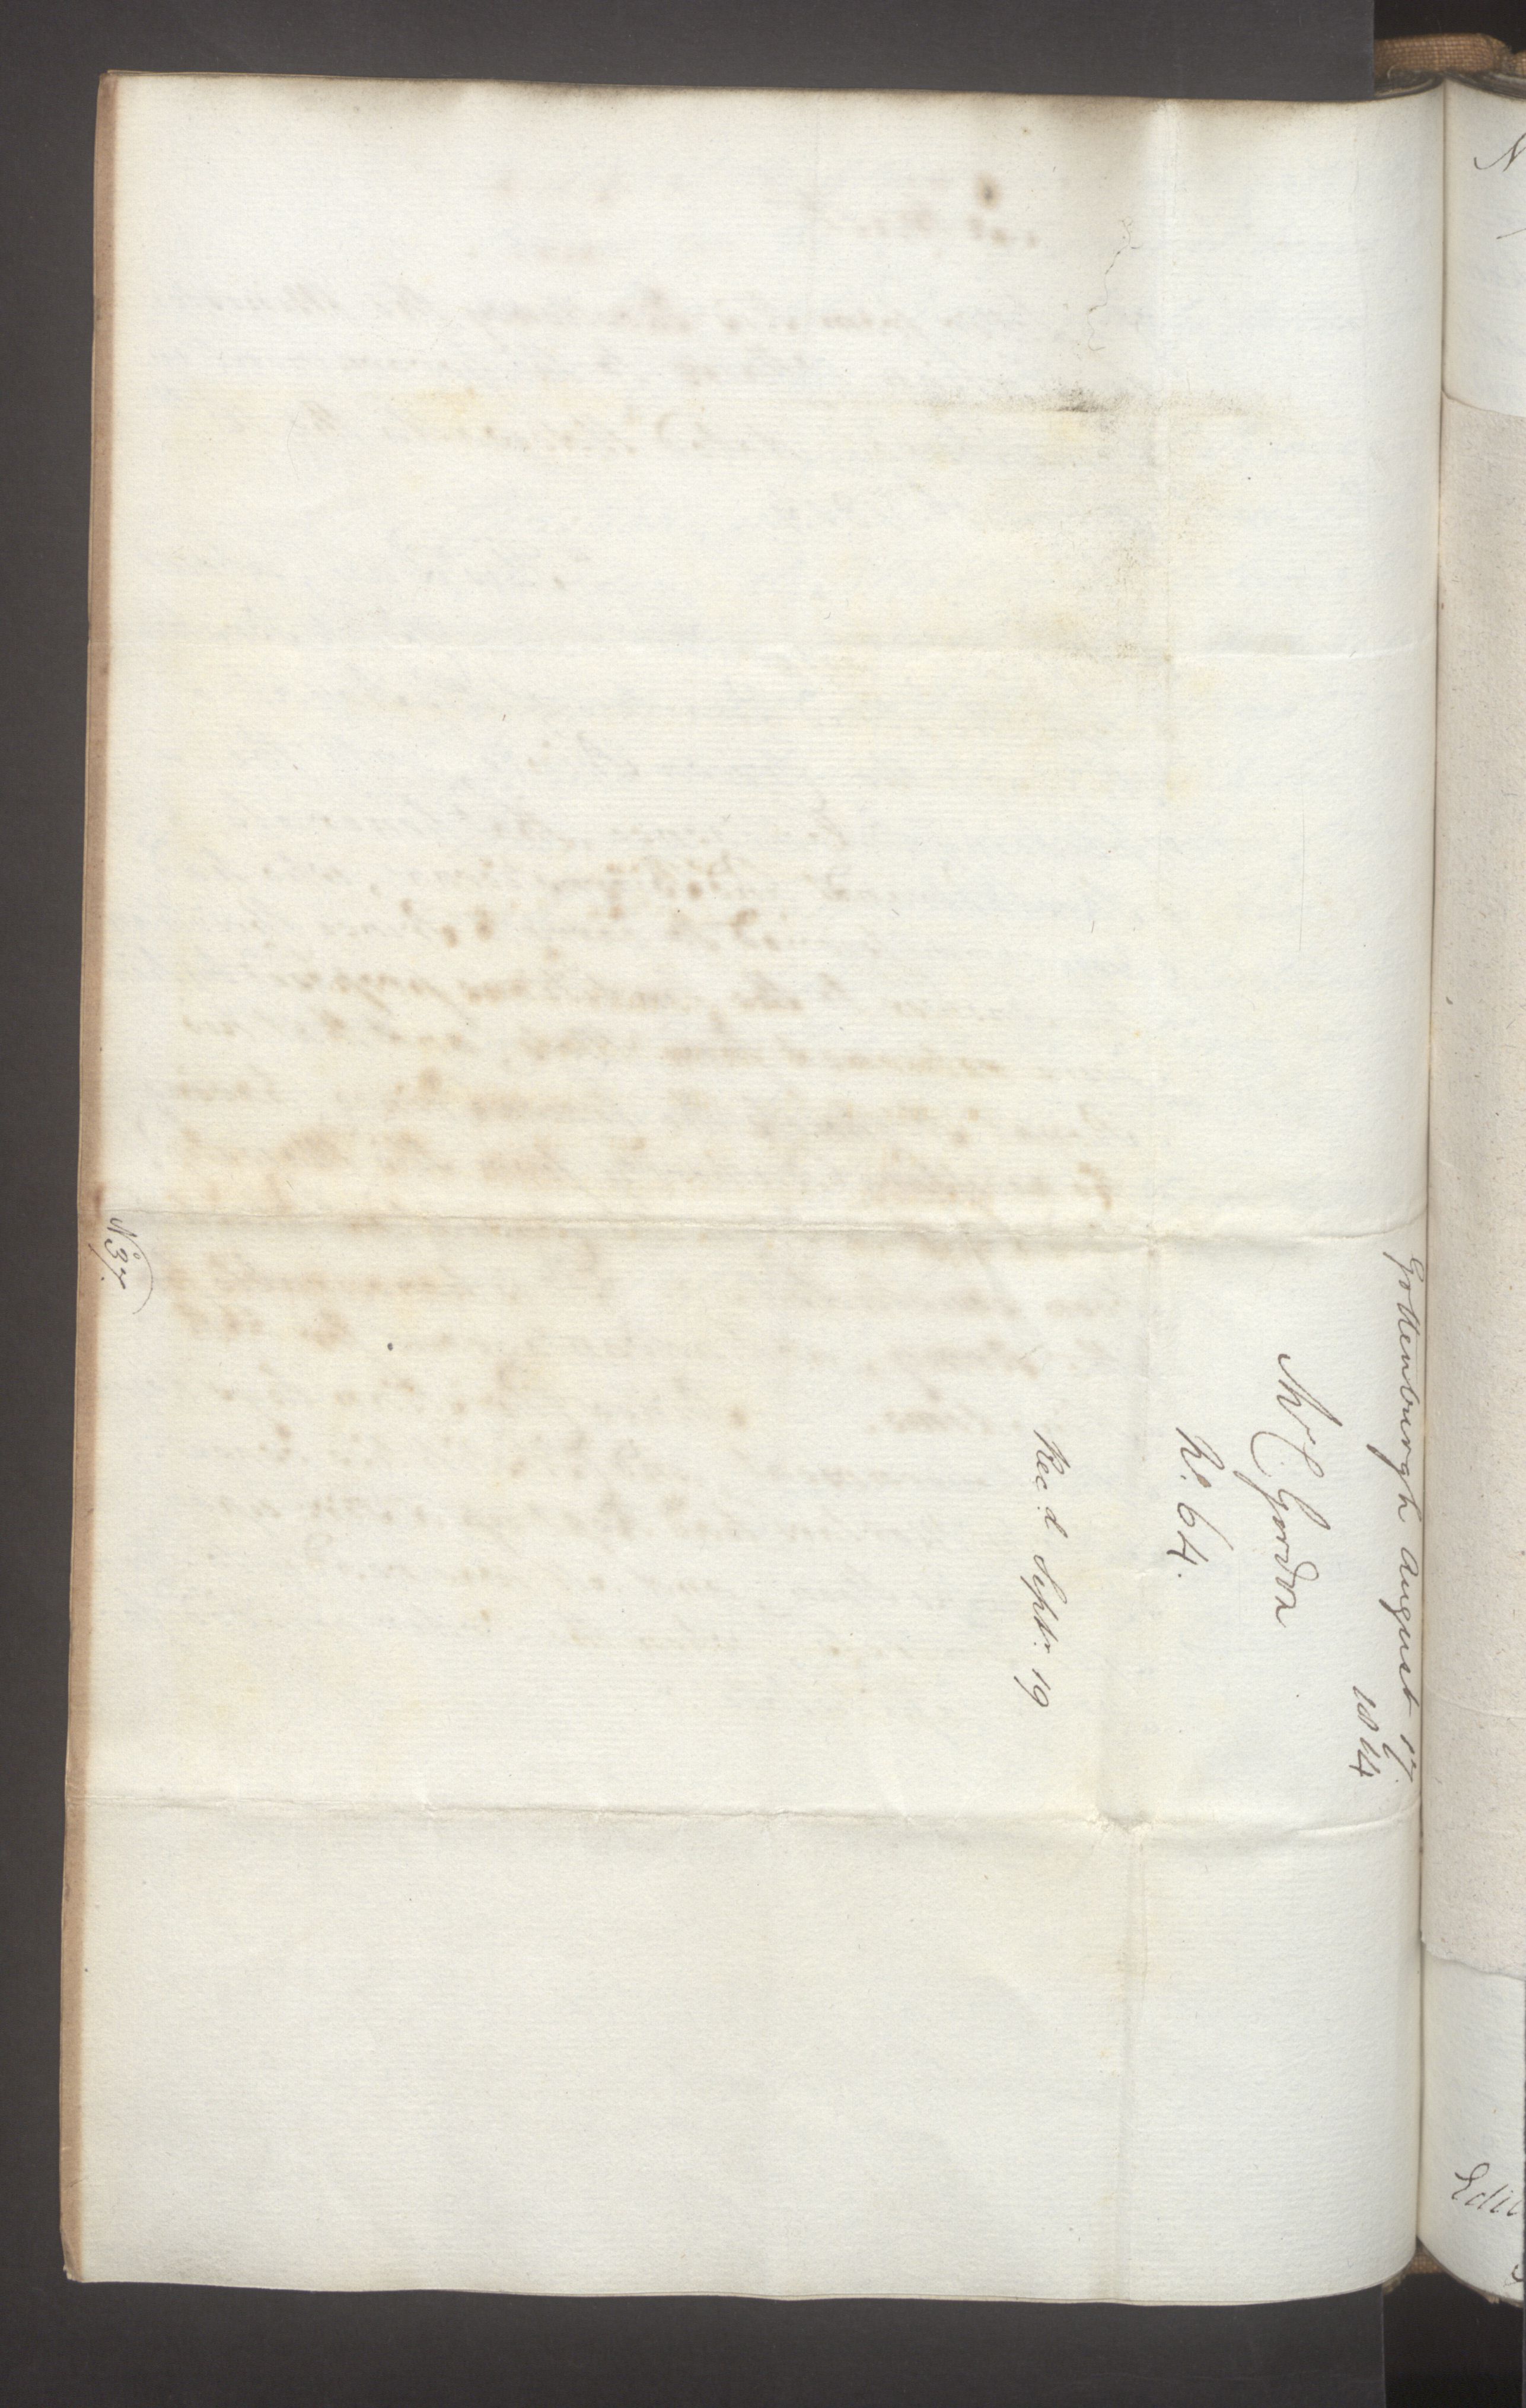 Foreign Office*, UKA/-/FO 38/16: Sir C. Gordon. Reports from Malmö, Jonkoping, and Helsingborg, 1814, p. 89